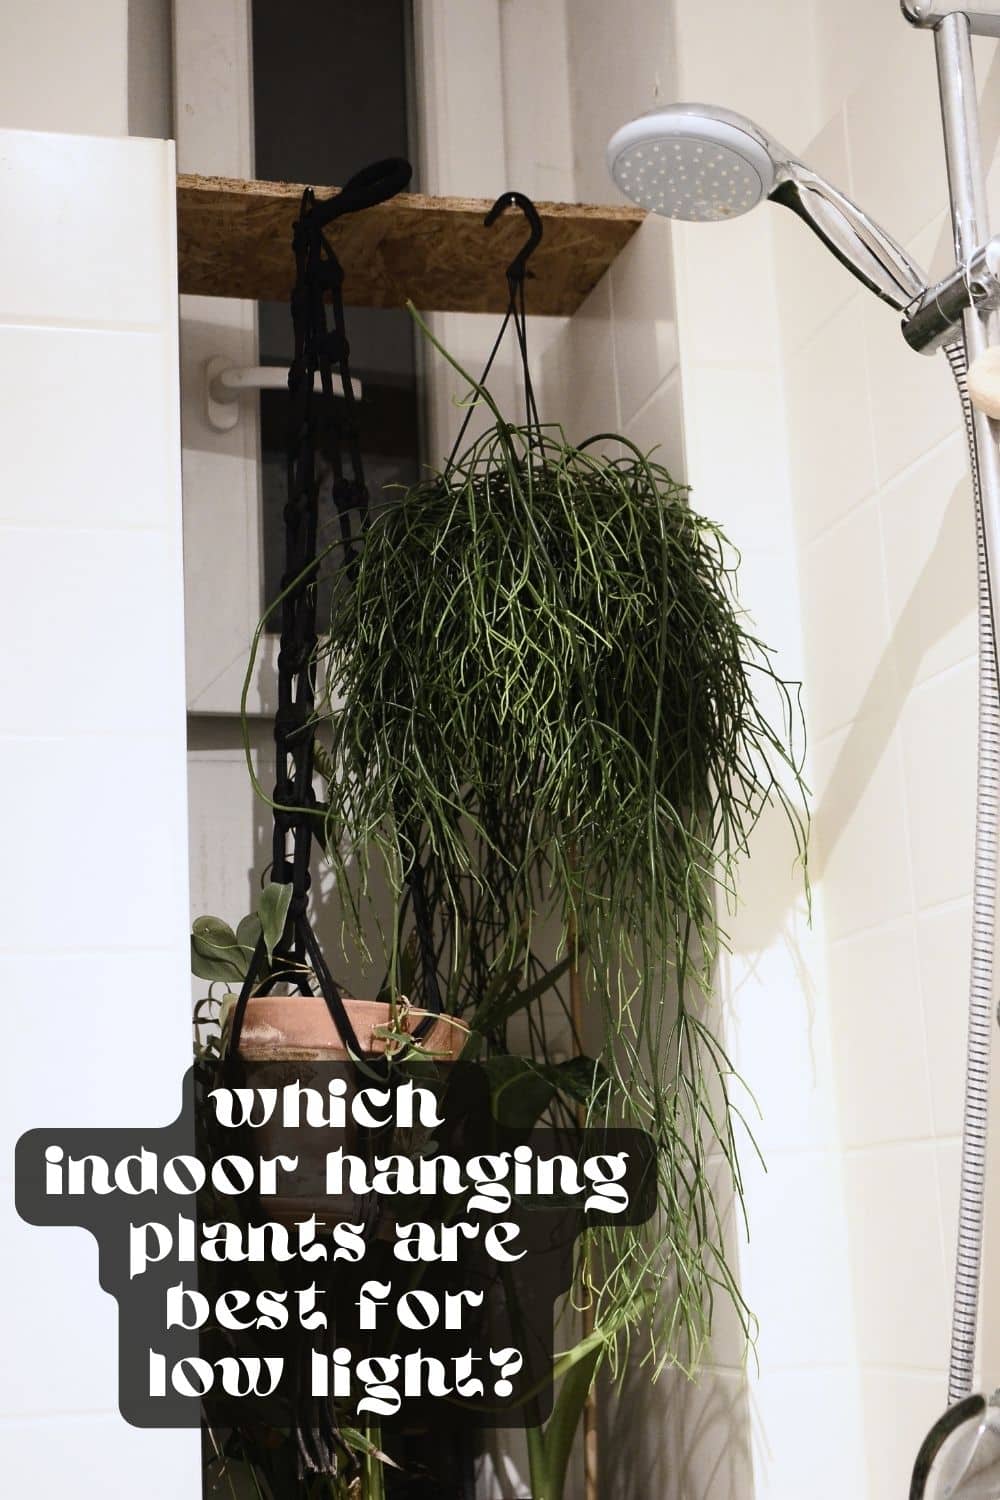 Indoor hanging plants add a touch of beauty and freshness to any living space - whether it's your home or workplace. However, not all indoor spaces receive ample natural light, making it challenging to choose the right plants that’ll thrive in low-light conditions. 